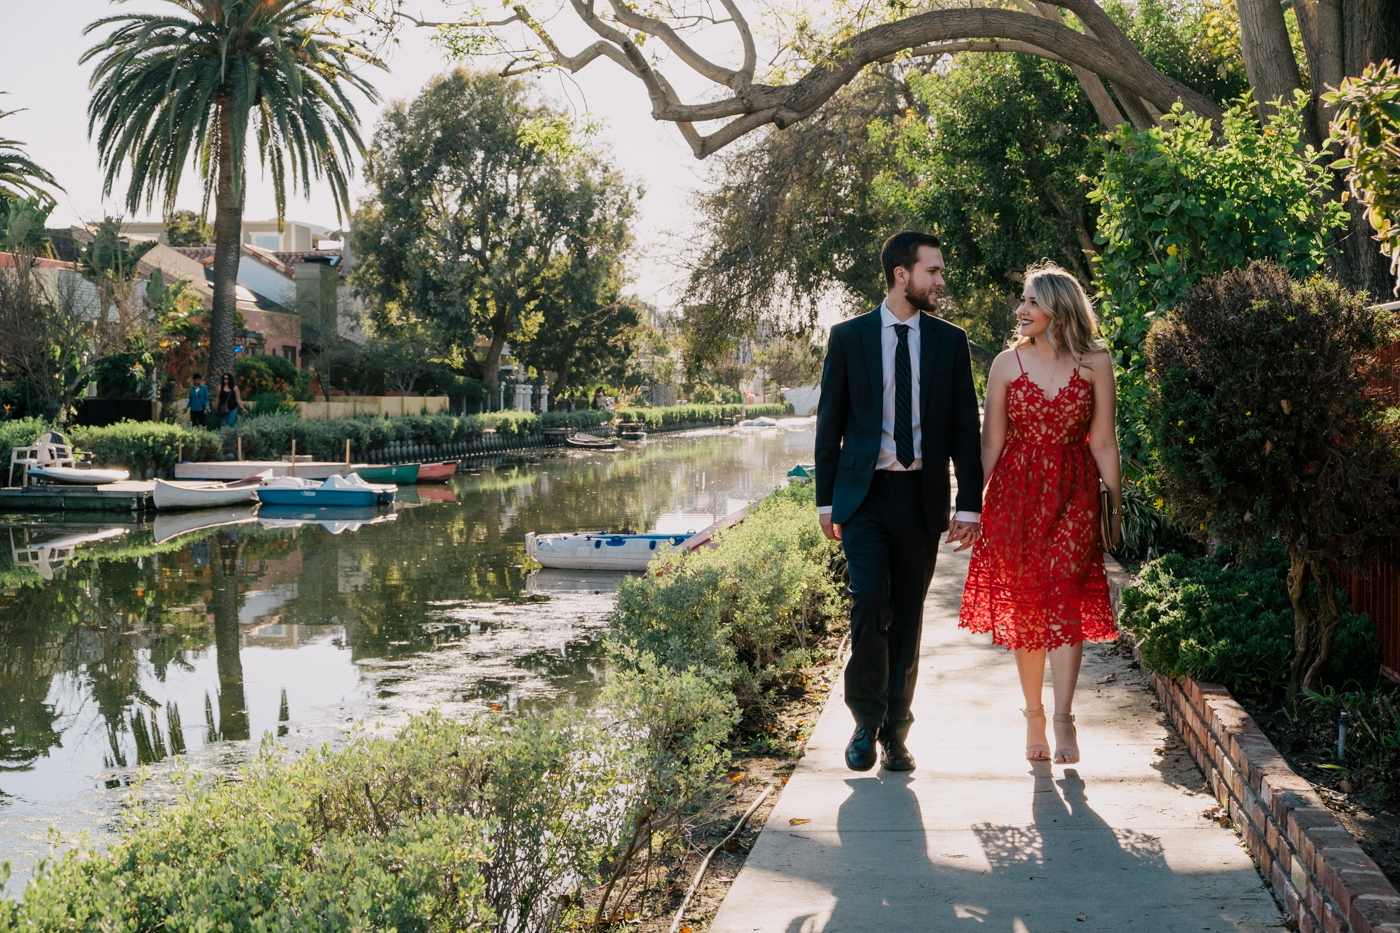 Benjamin and Debora Dahl at the Venice Canals for Valentine's Day